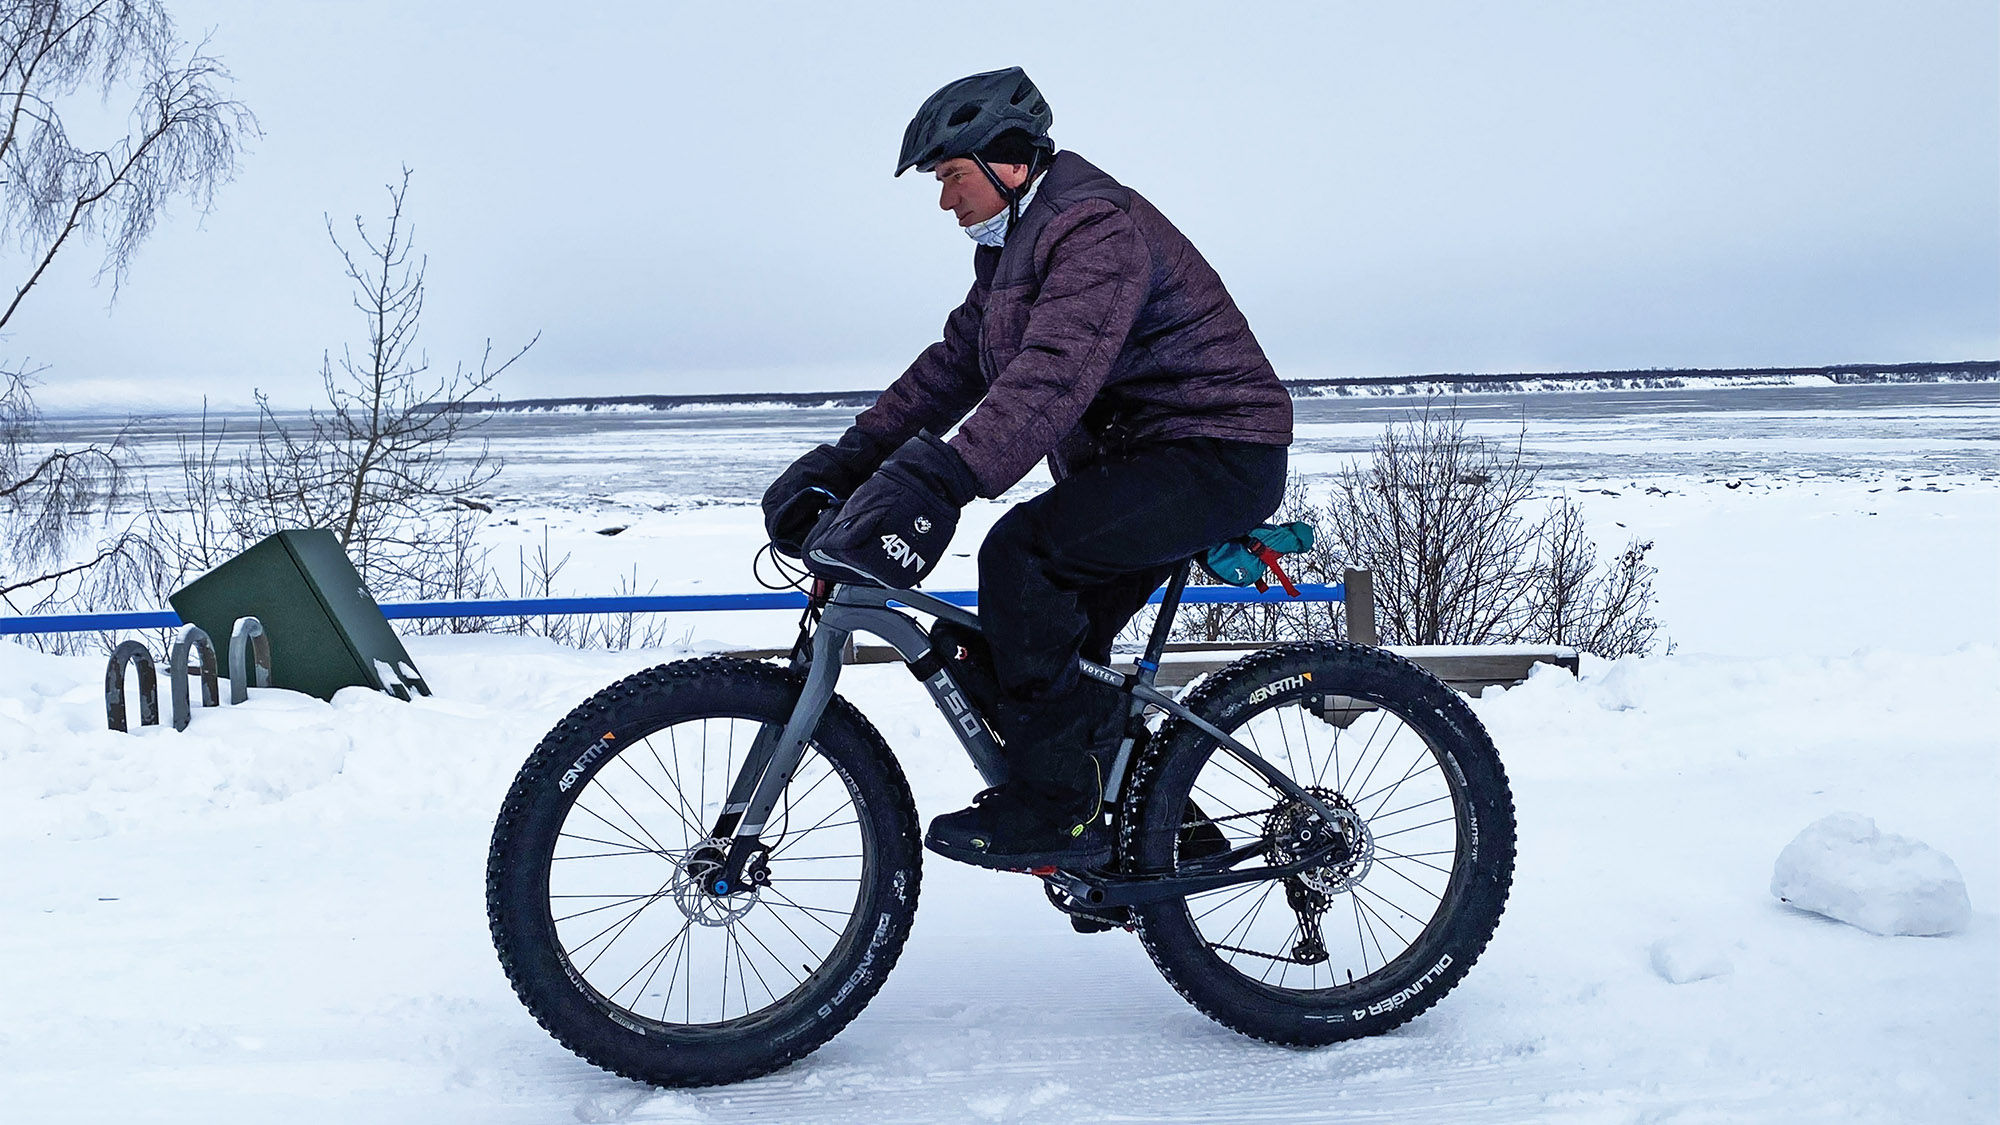 Alaska Bike Adventures in Anchorage offers fat tire bike rides, even in the snow and ice. Here, the author rides along the Cook Inlet on Anchorage's Coastal Trail.